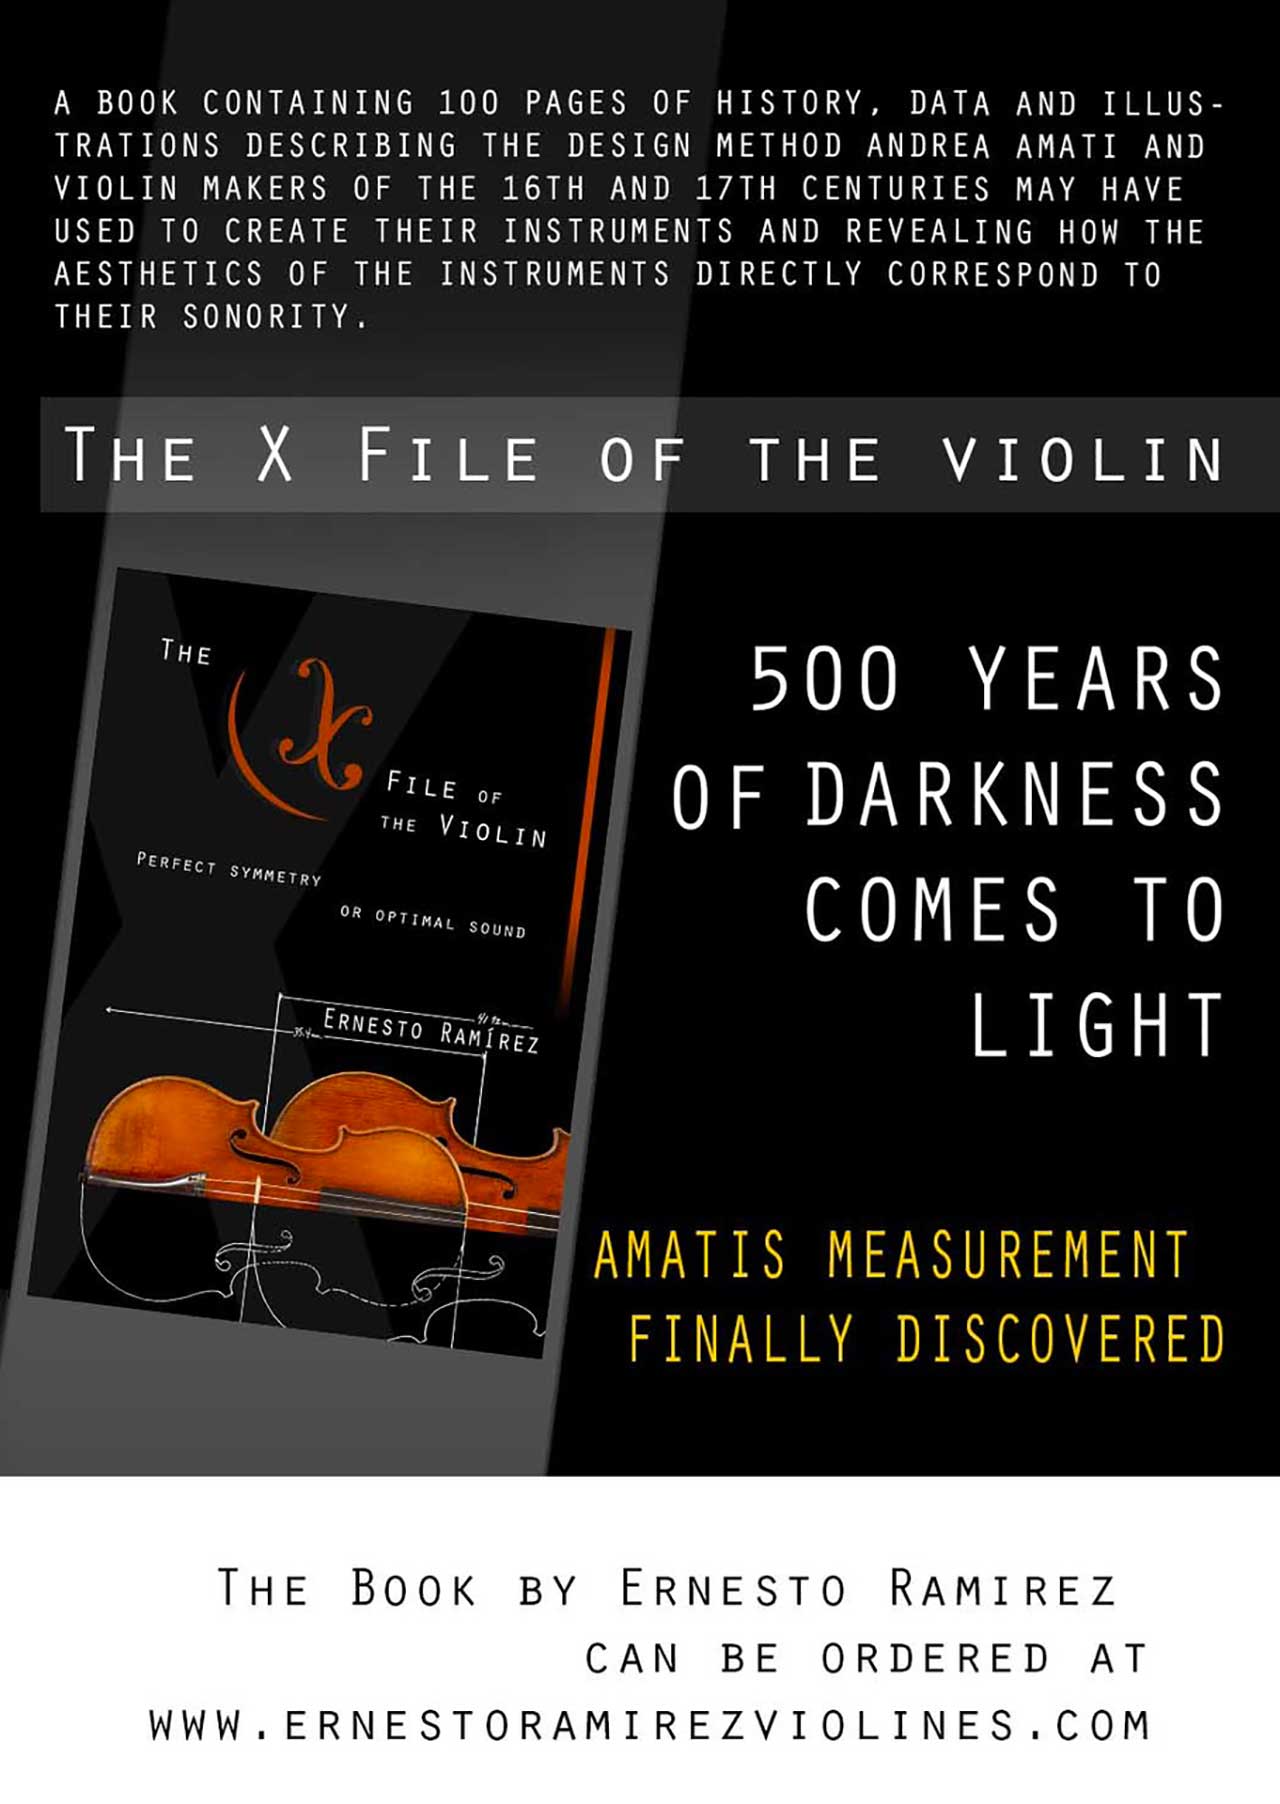 Ernesto Ramirez Luthier Book The X File of the Violin